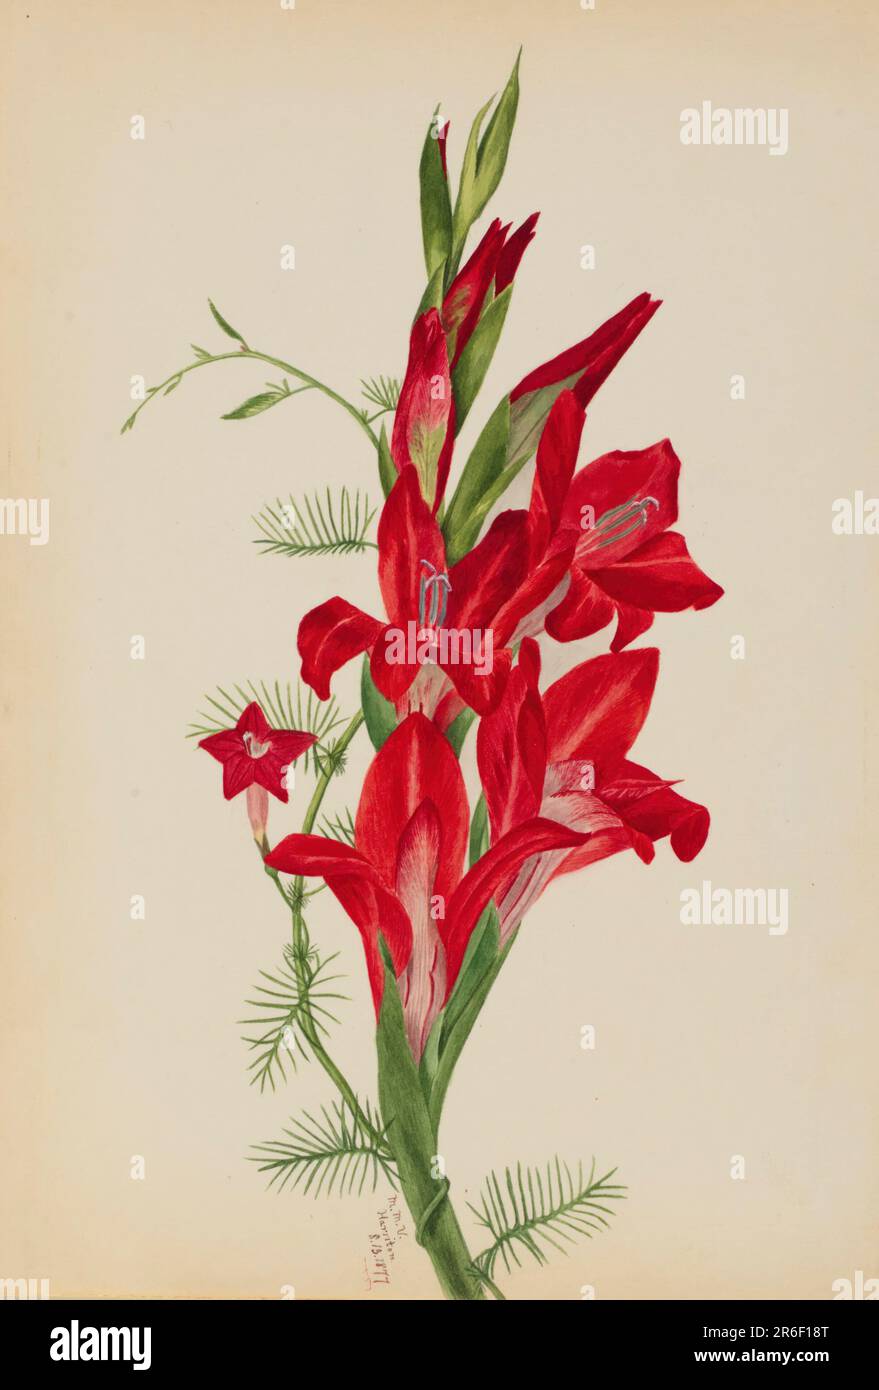 Cannas and Cypress Vine (Canna species and Ipomoea quamoclit). Date: 1877. Watercolor on paper. Museum: Smithsonian American Art Museum. Stock Photo